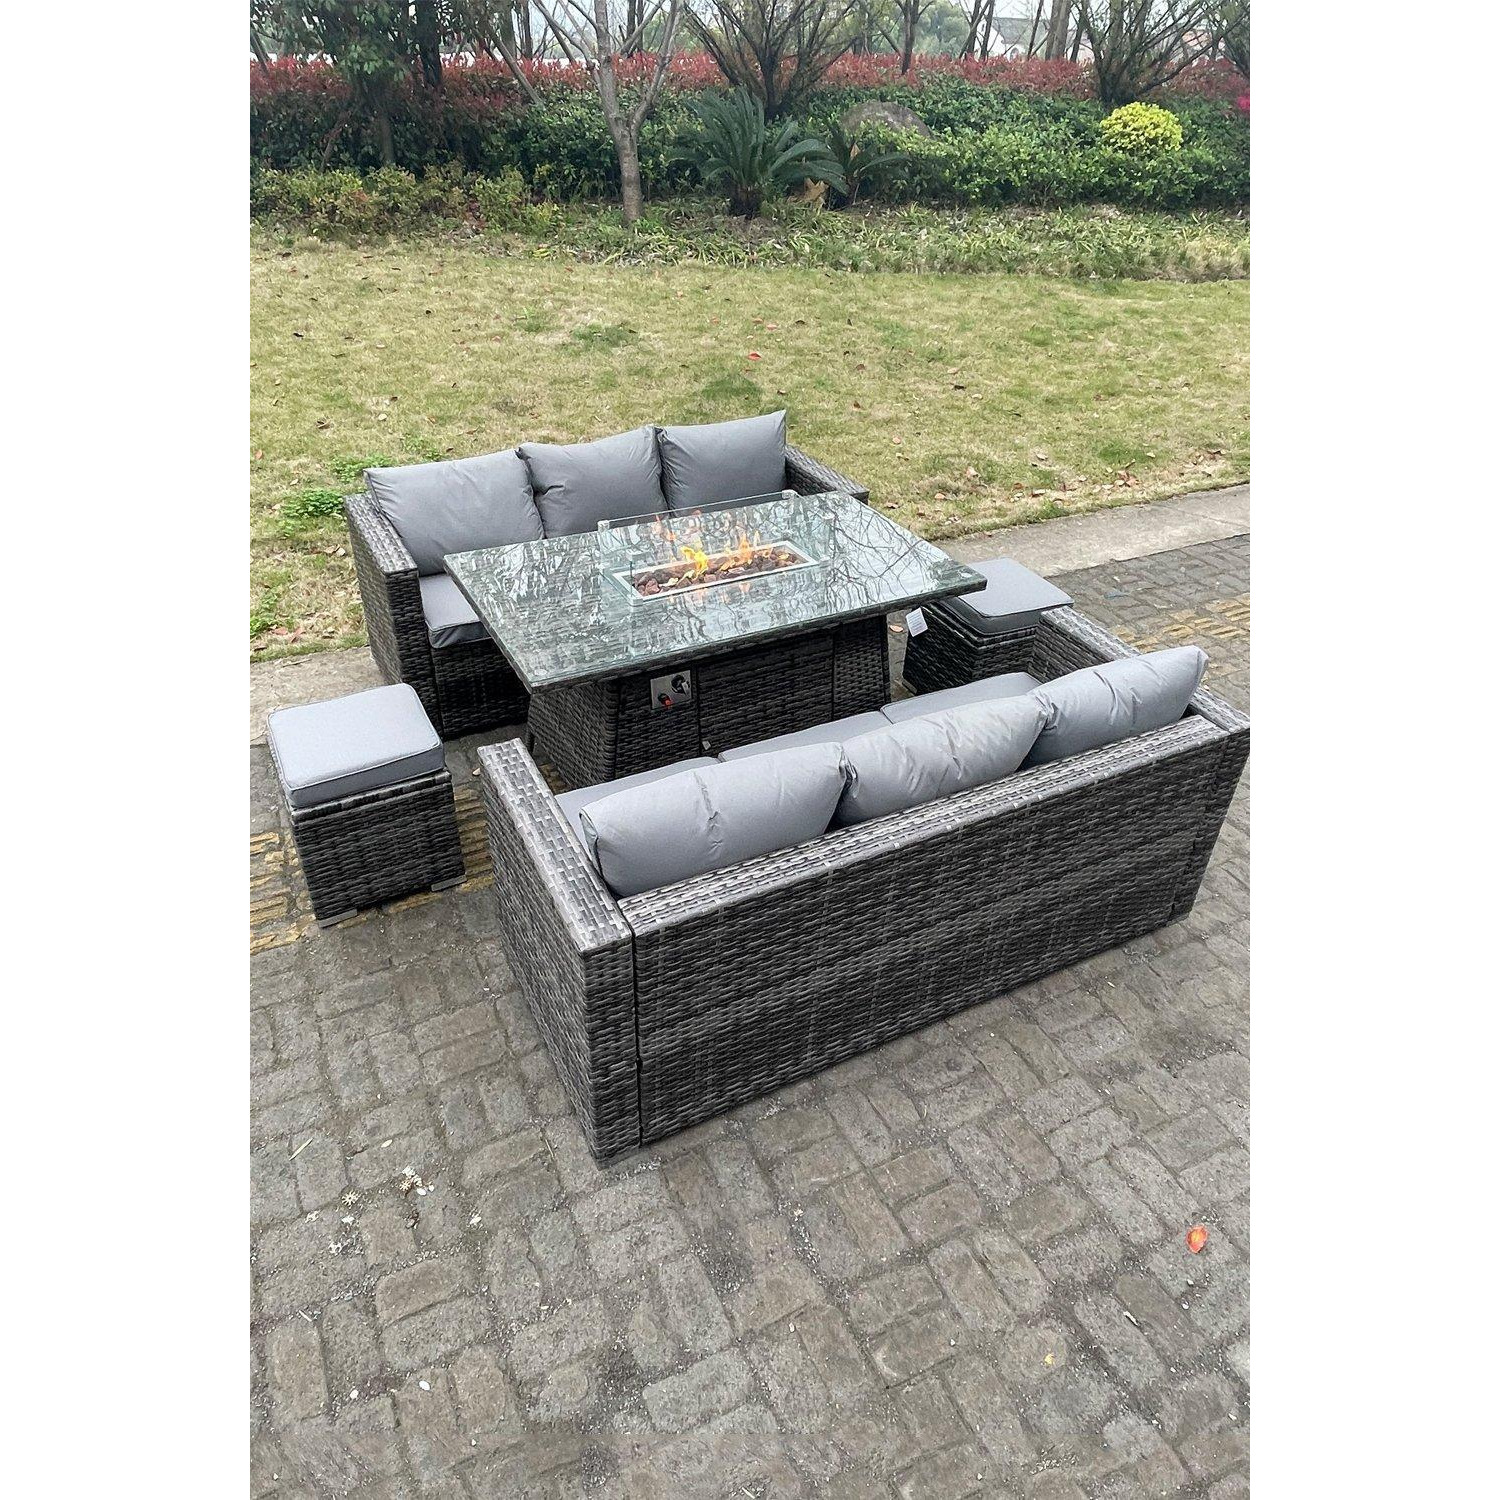 Outdoor PE Rattan Garden Furniture Gas Fire Pit Dining Table Lounge Sofa 2 PC Footstools Dark Grey - image 1